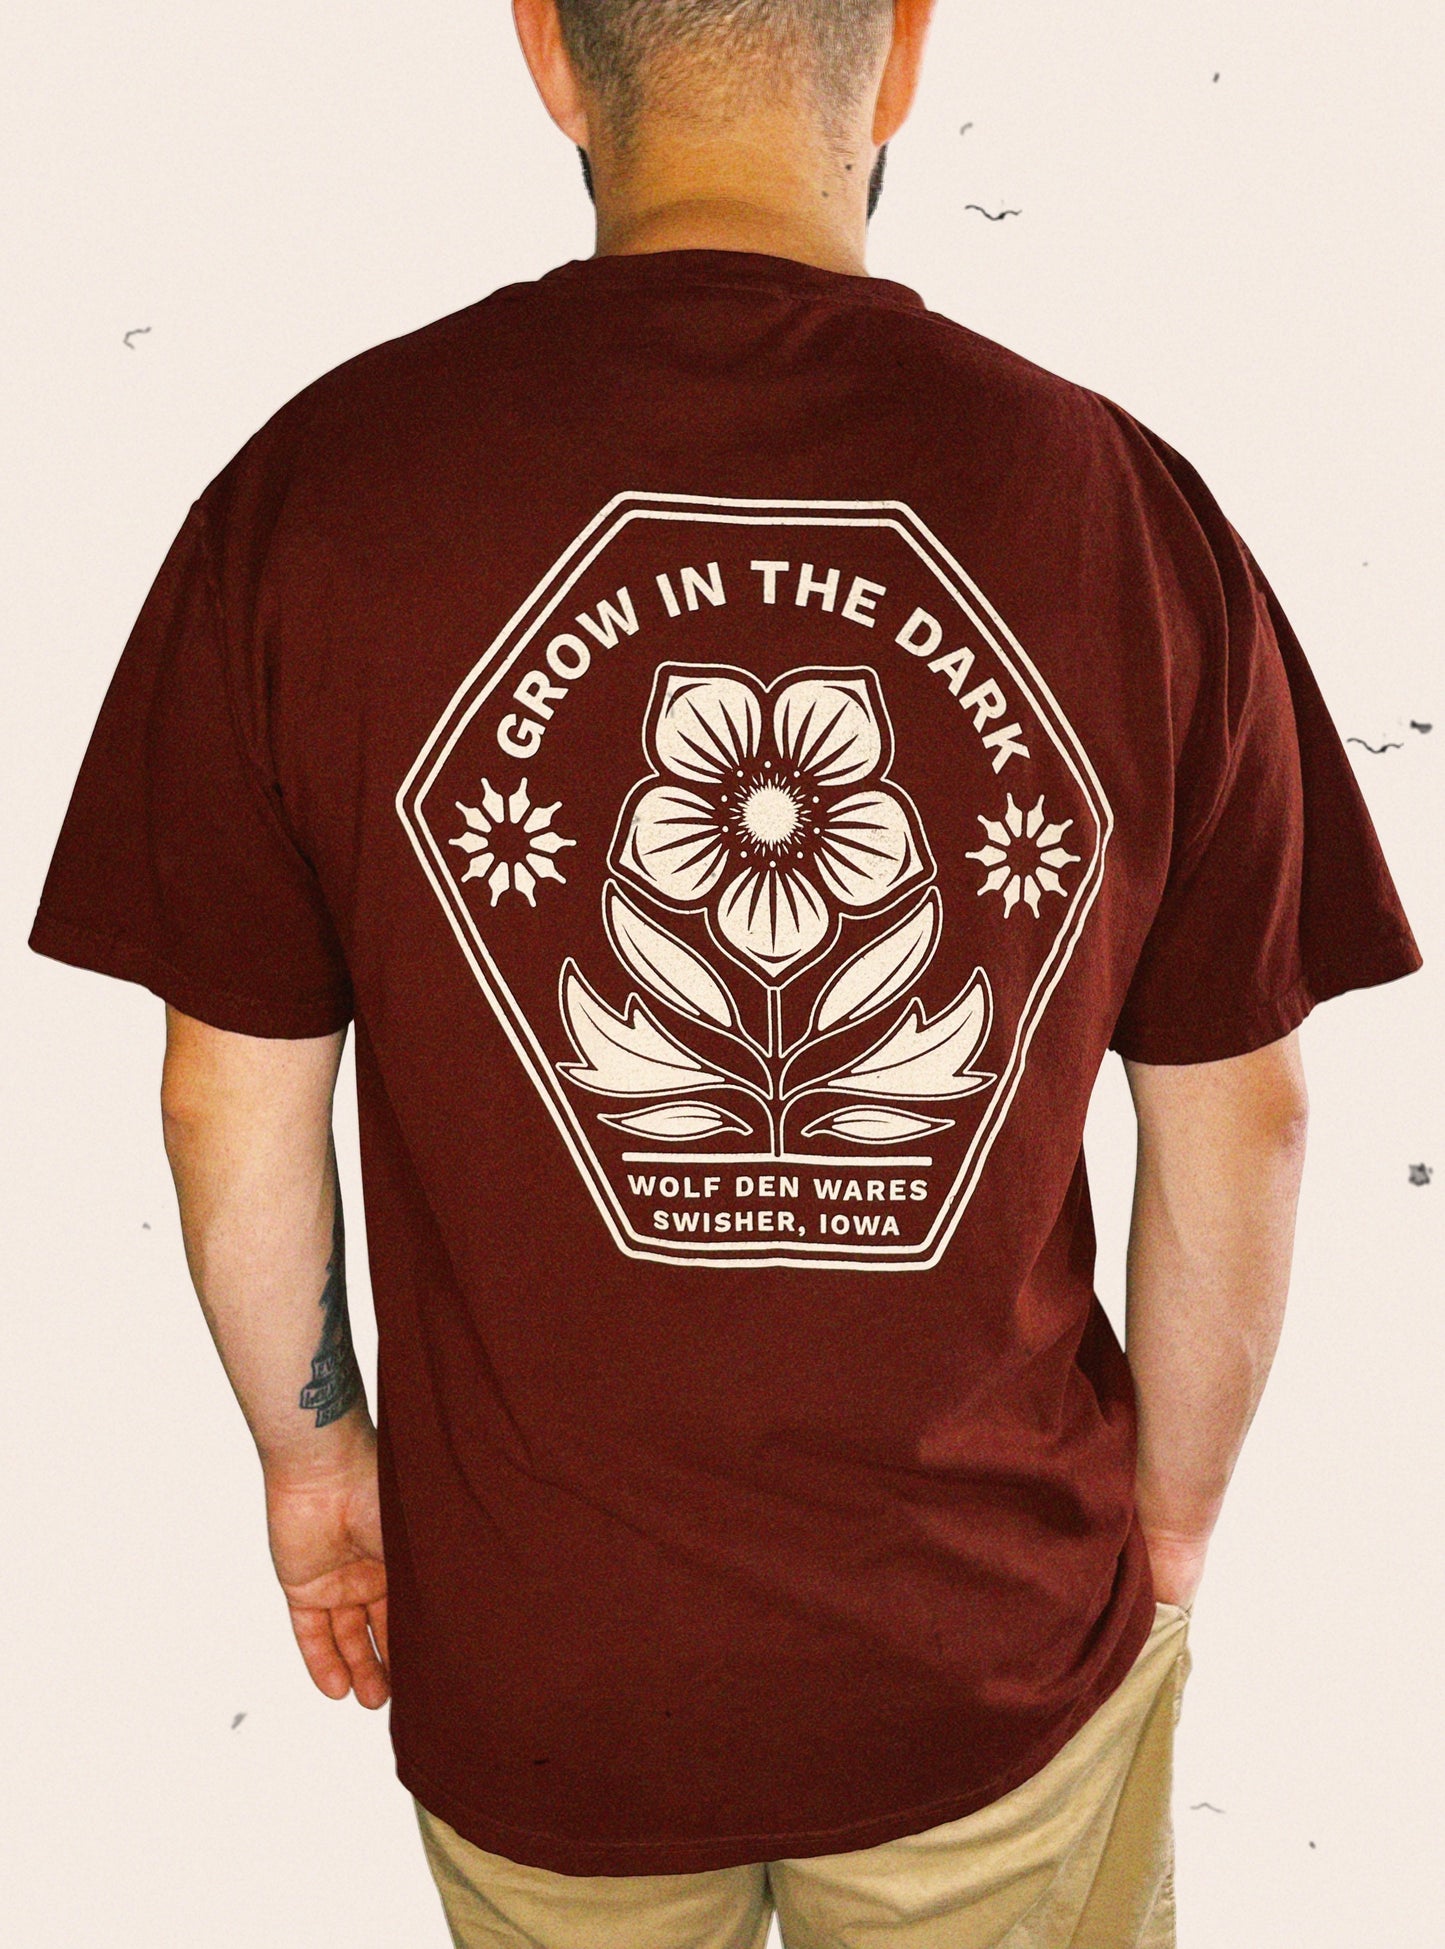 Maroon Comfort Colors tee embellished with a floral logo and the words GROW IN THE DARK, WOLF DEN WARES, and SWISHER, IOWA